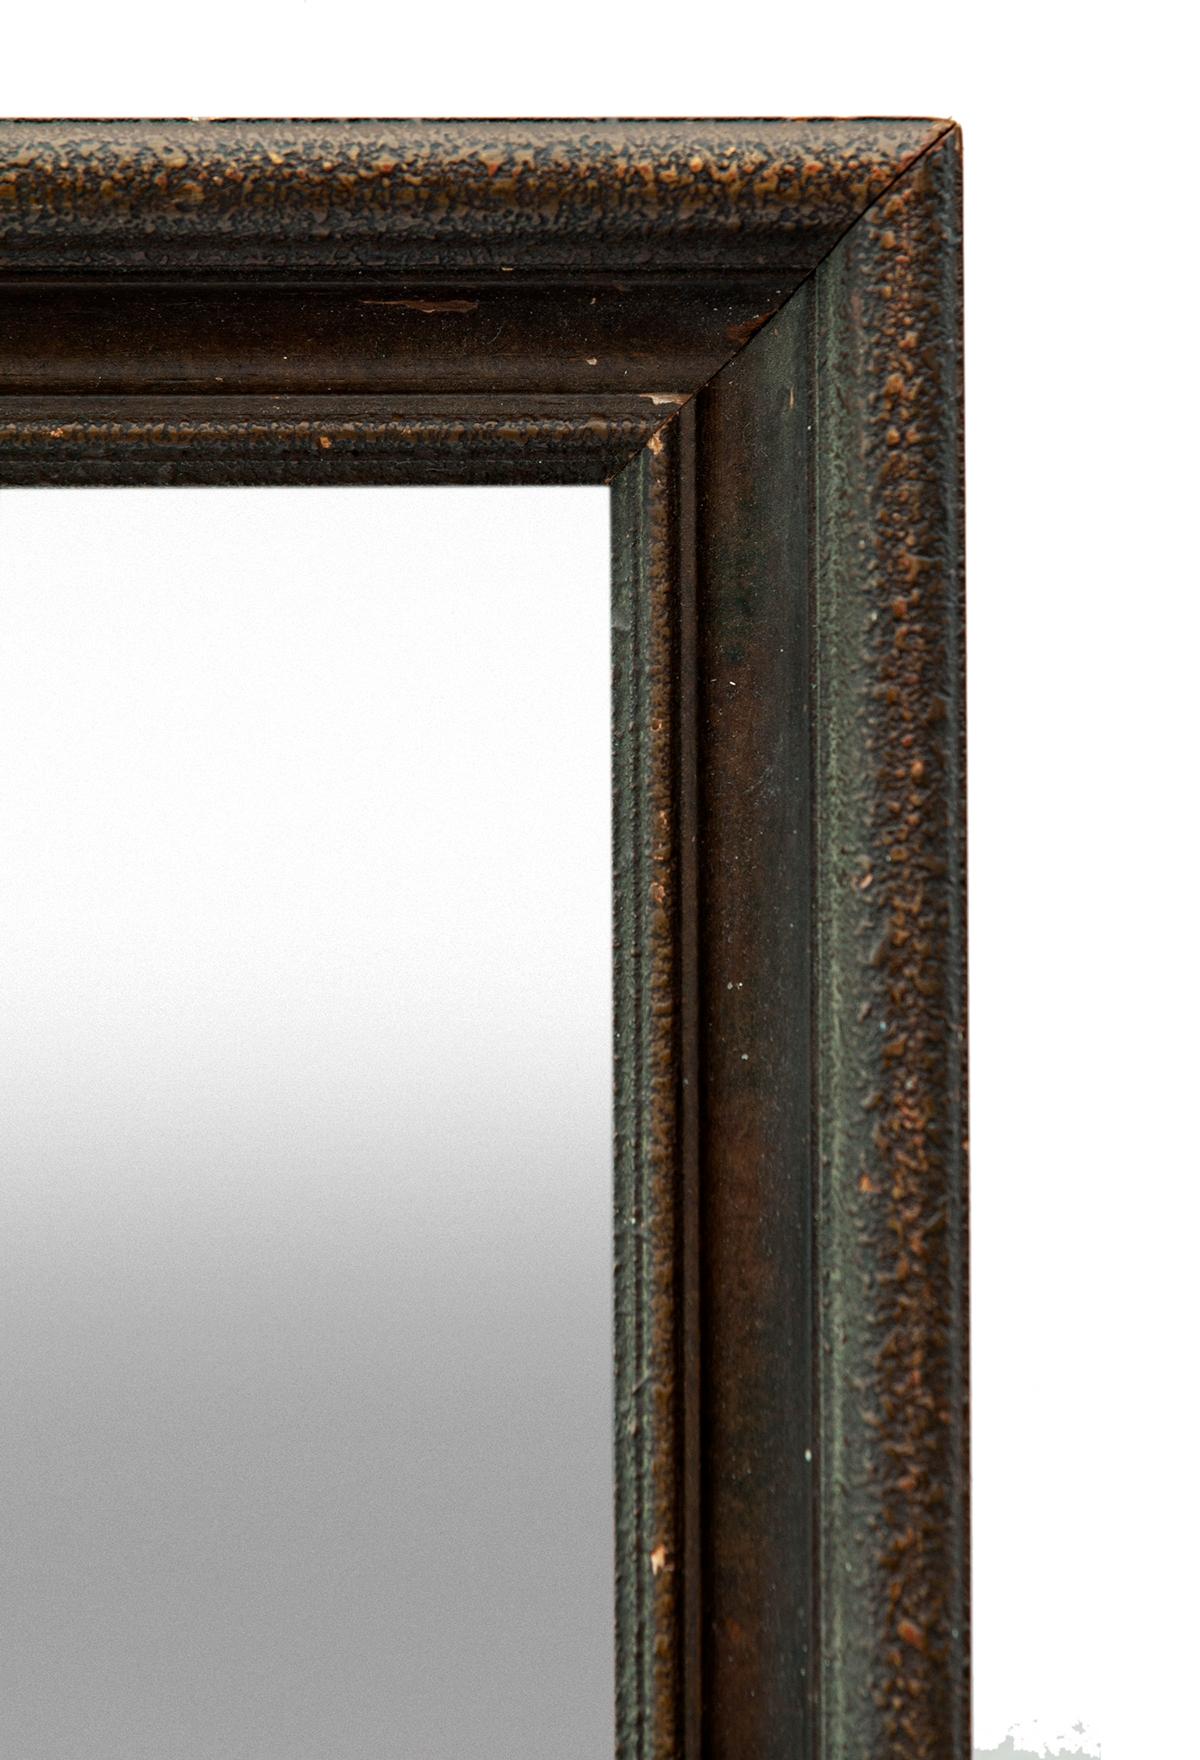 A timeless piece.
Original aged bronze finish on this handcrafted hardwood & dark gesso finished accent mirror.